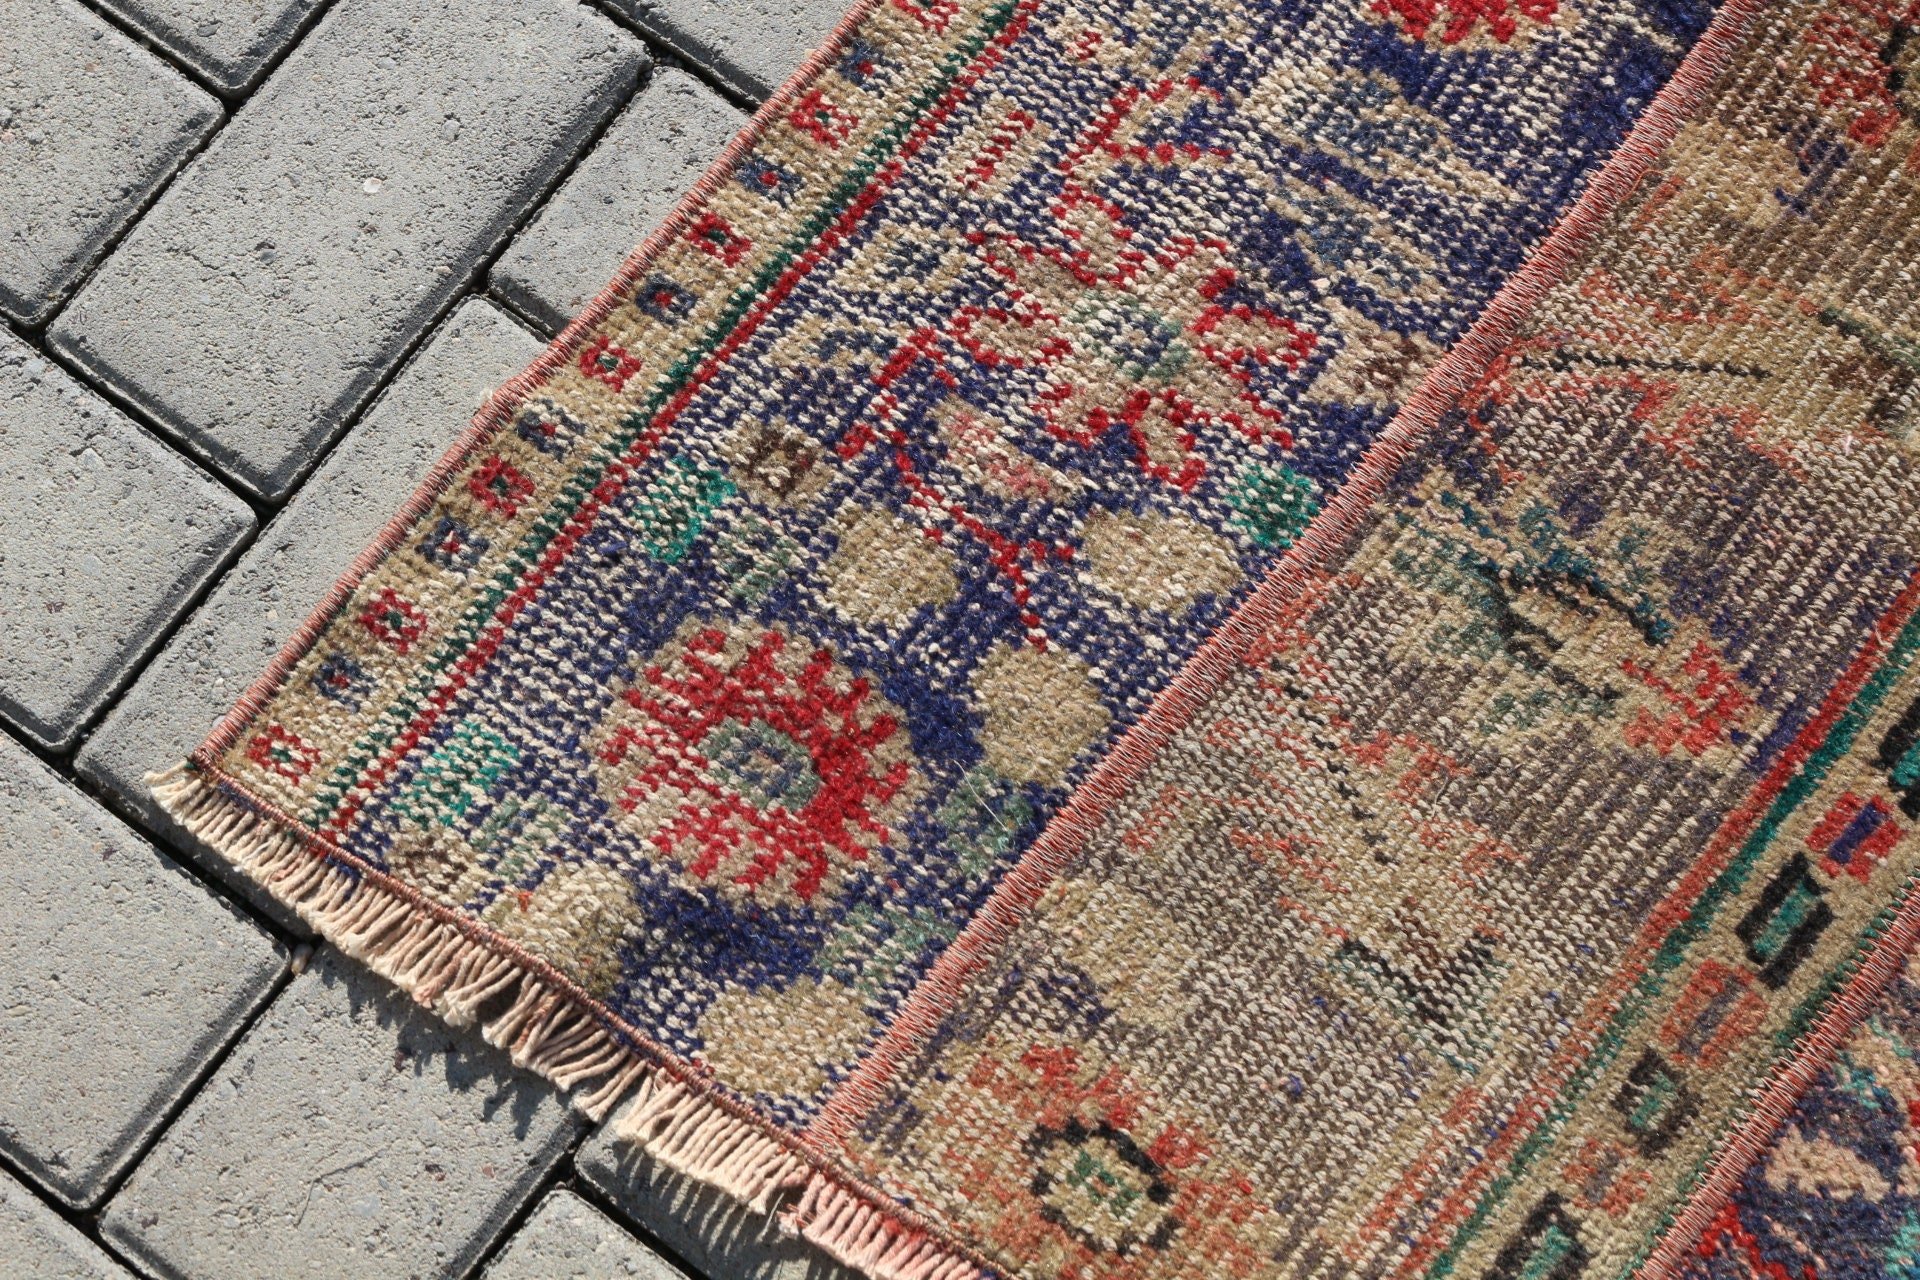 Blue Antique Rug, Car Mat Rug, 3.1x3.7 ft Small Rugs, Wool Rugs, Rugs for Door Mat, Door Mat Rugs, Oushak Rug, Turkish Rugs, Vintage Rug